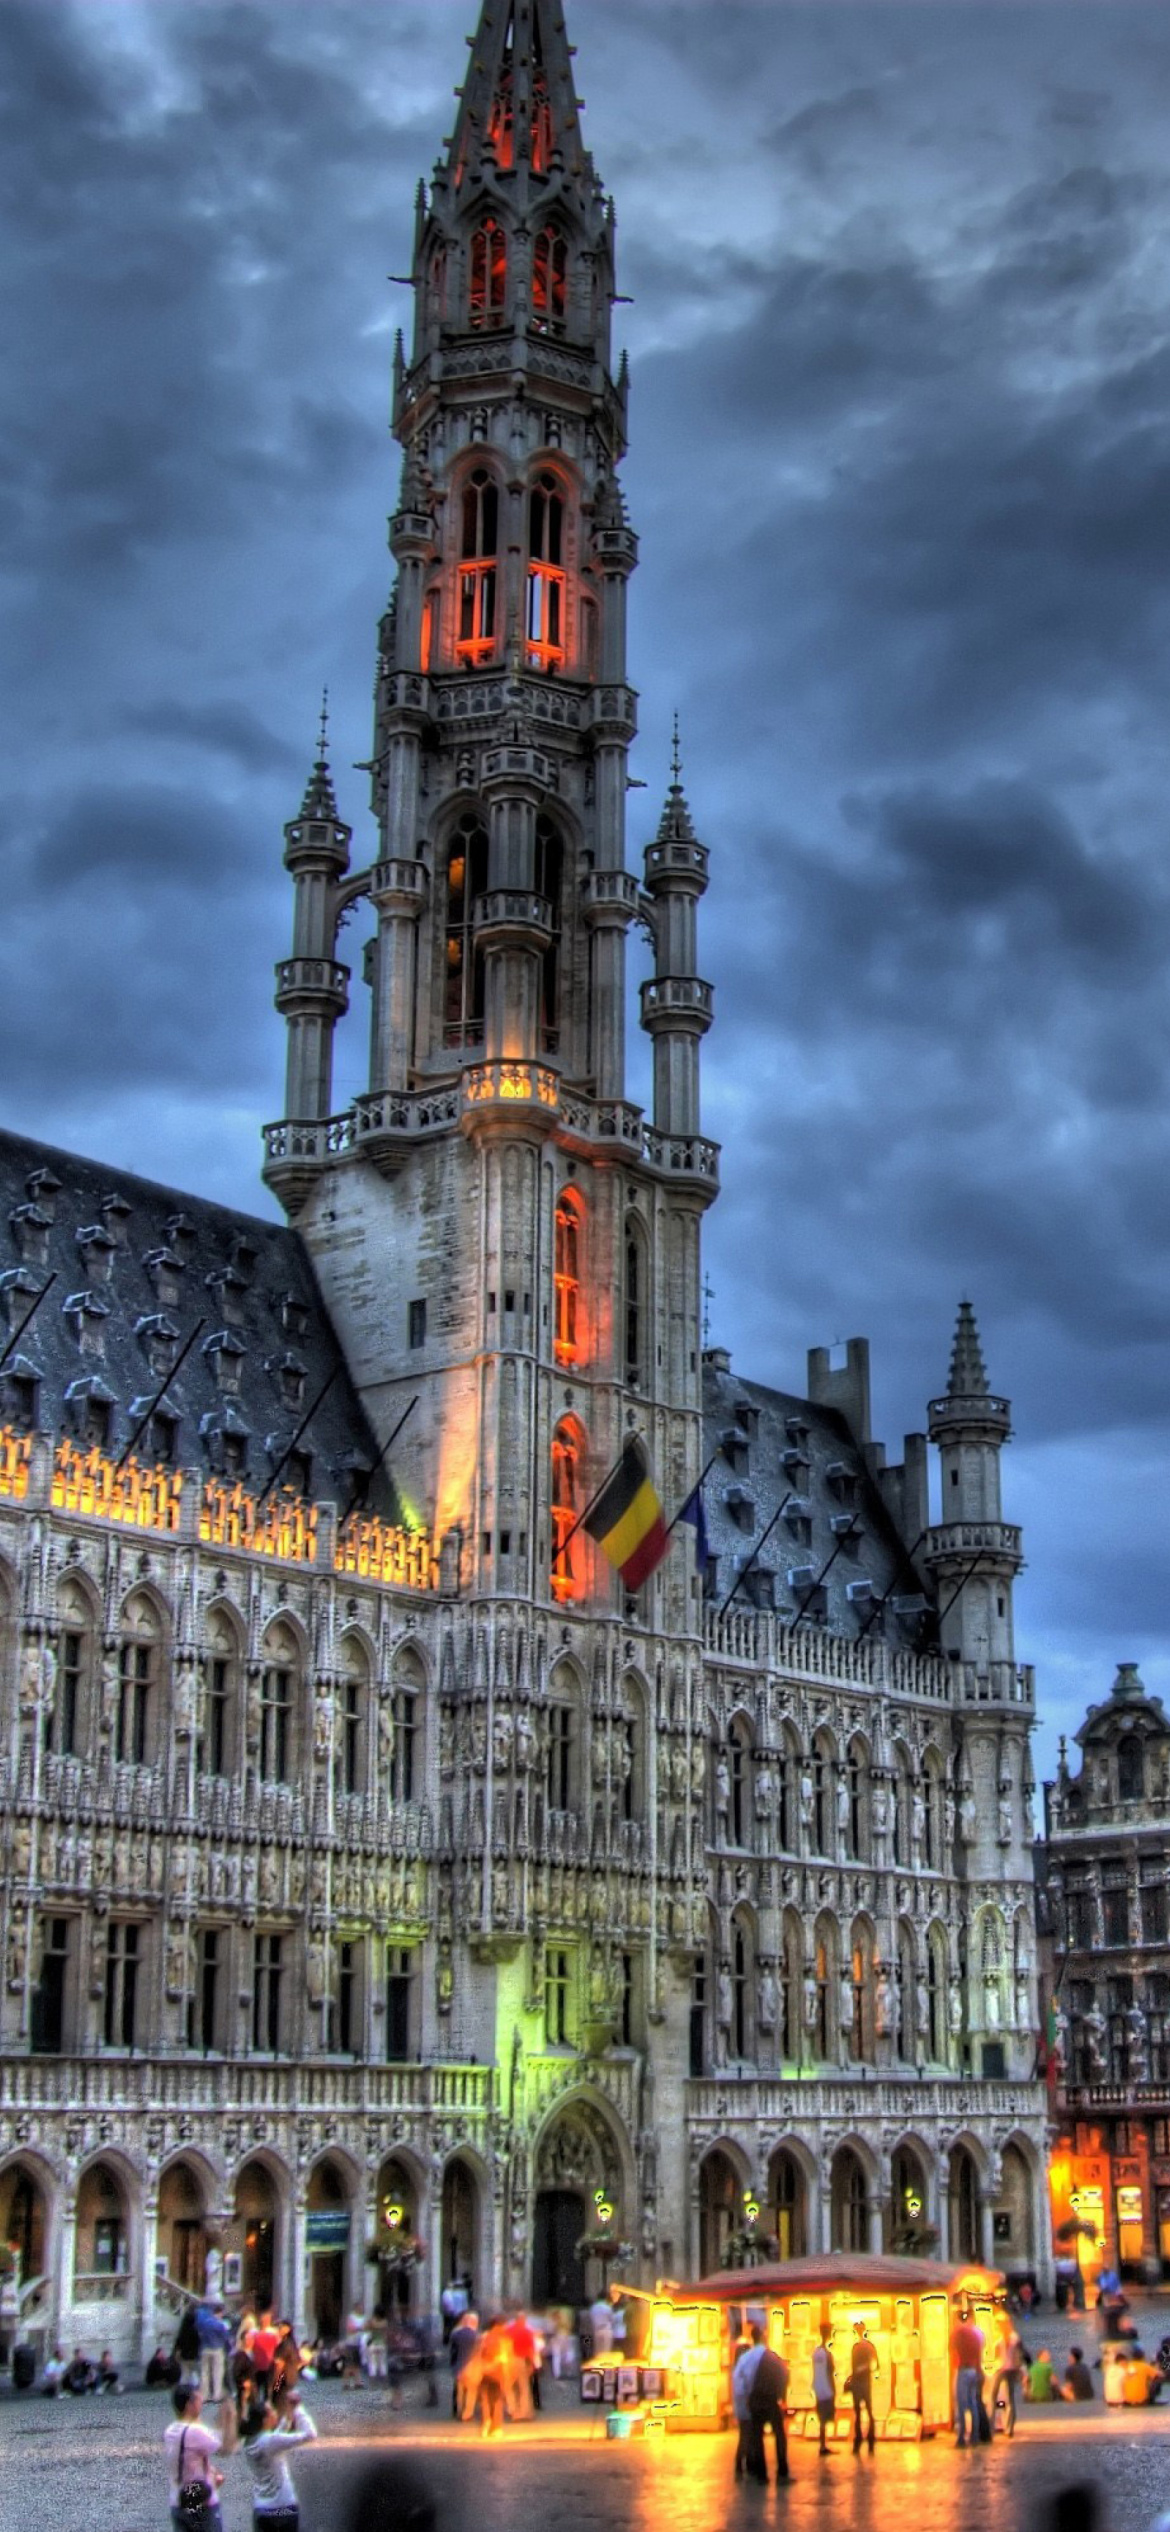 Brussels Grote Markt and Town Hall wallpaper 1170x2532